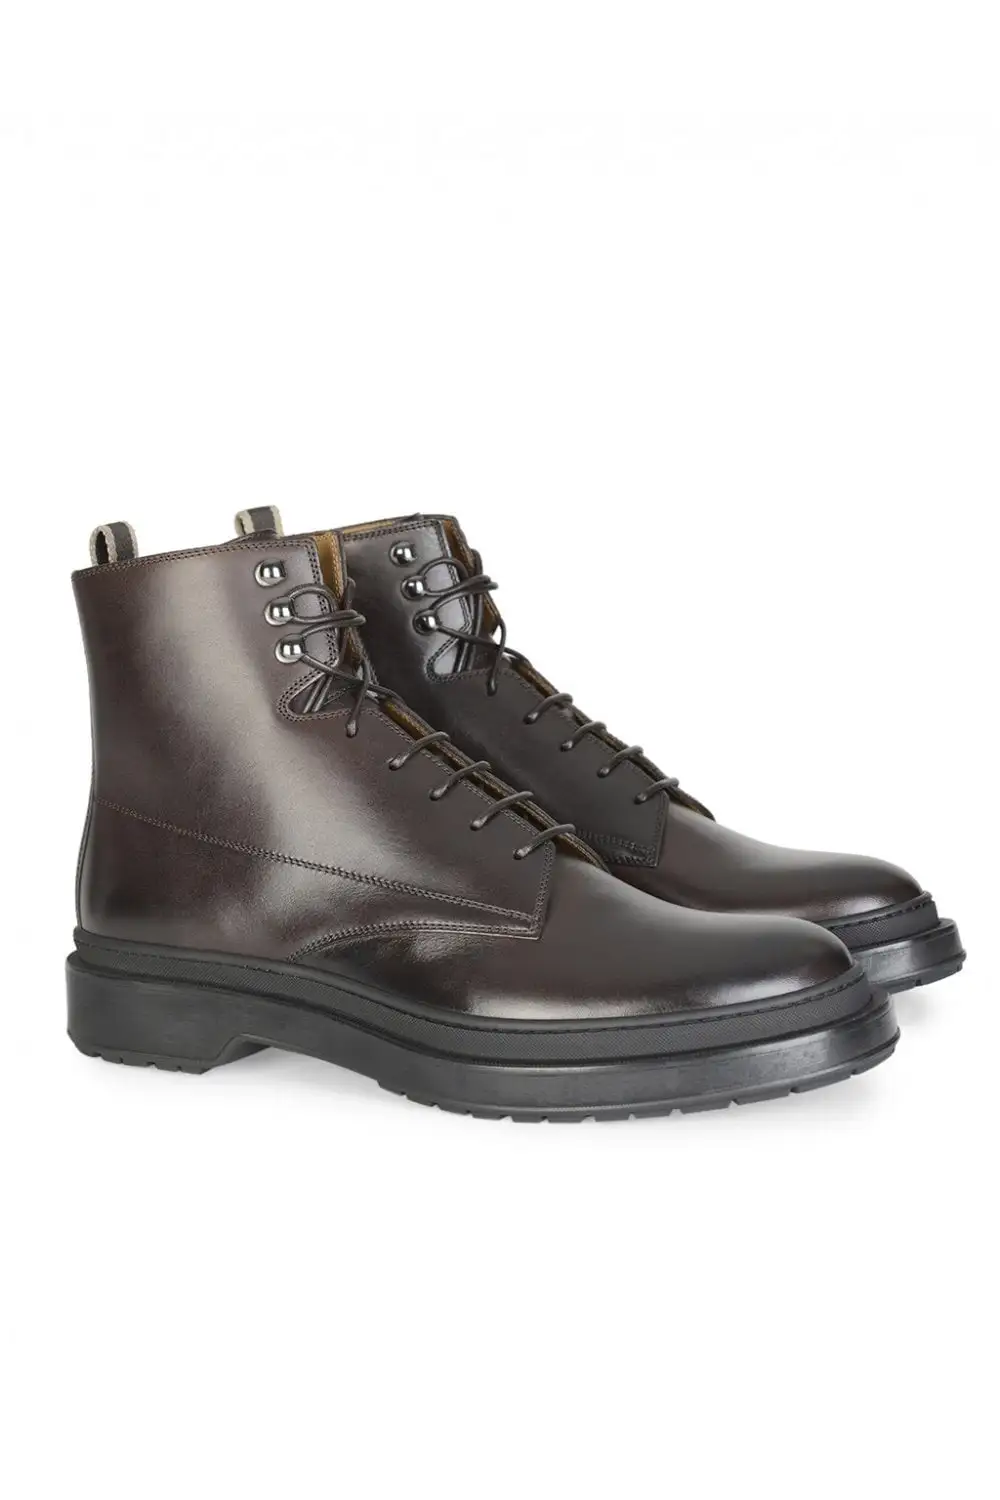 boots hugo boss taille 45